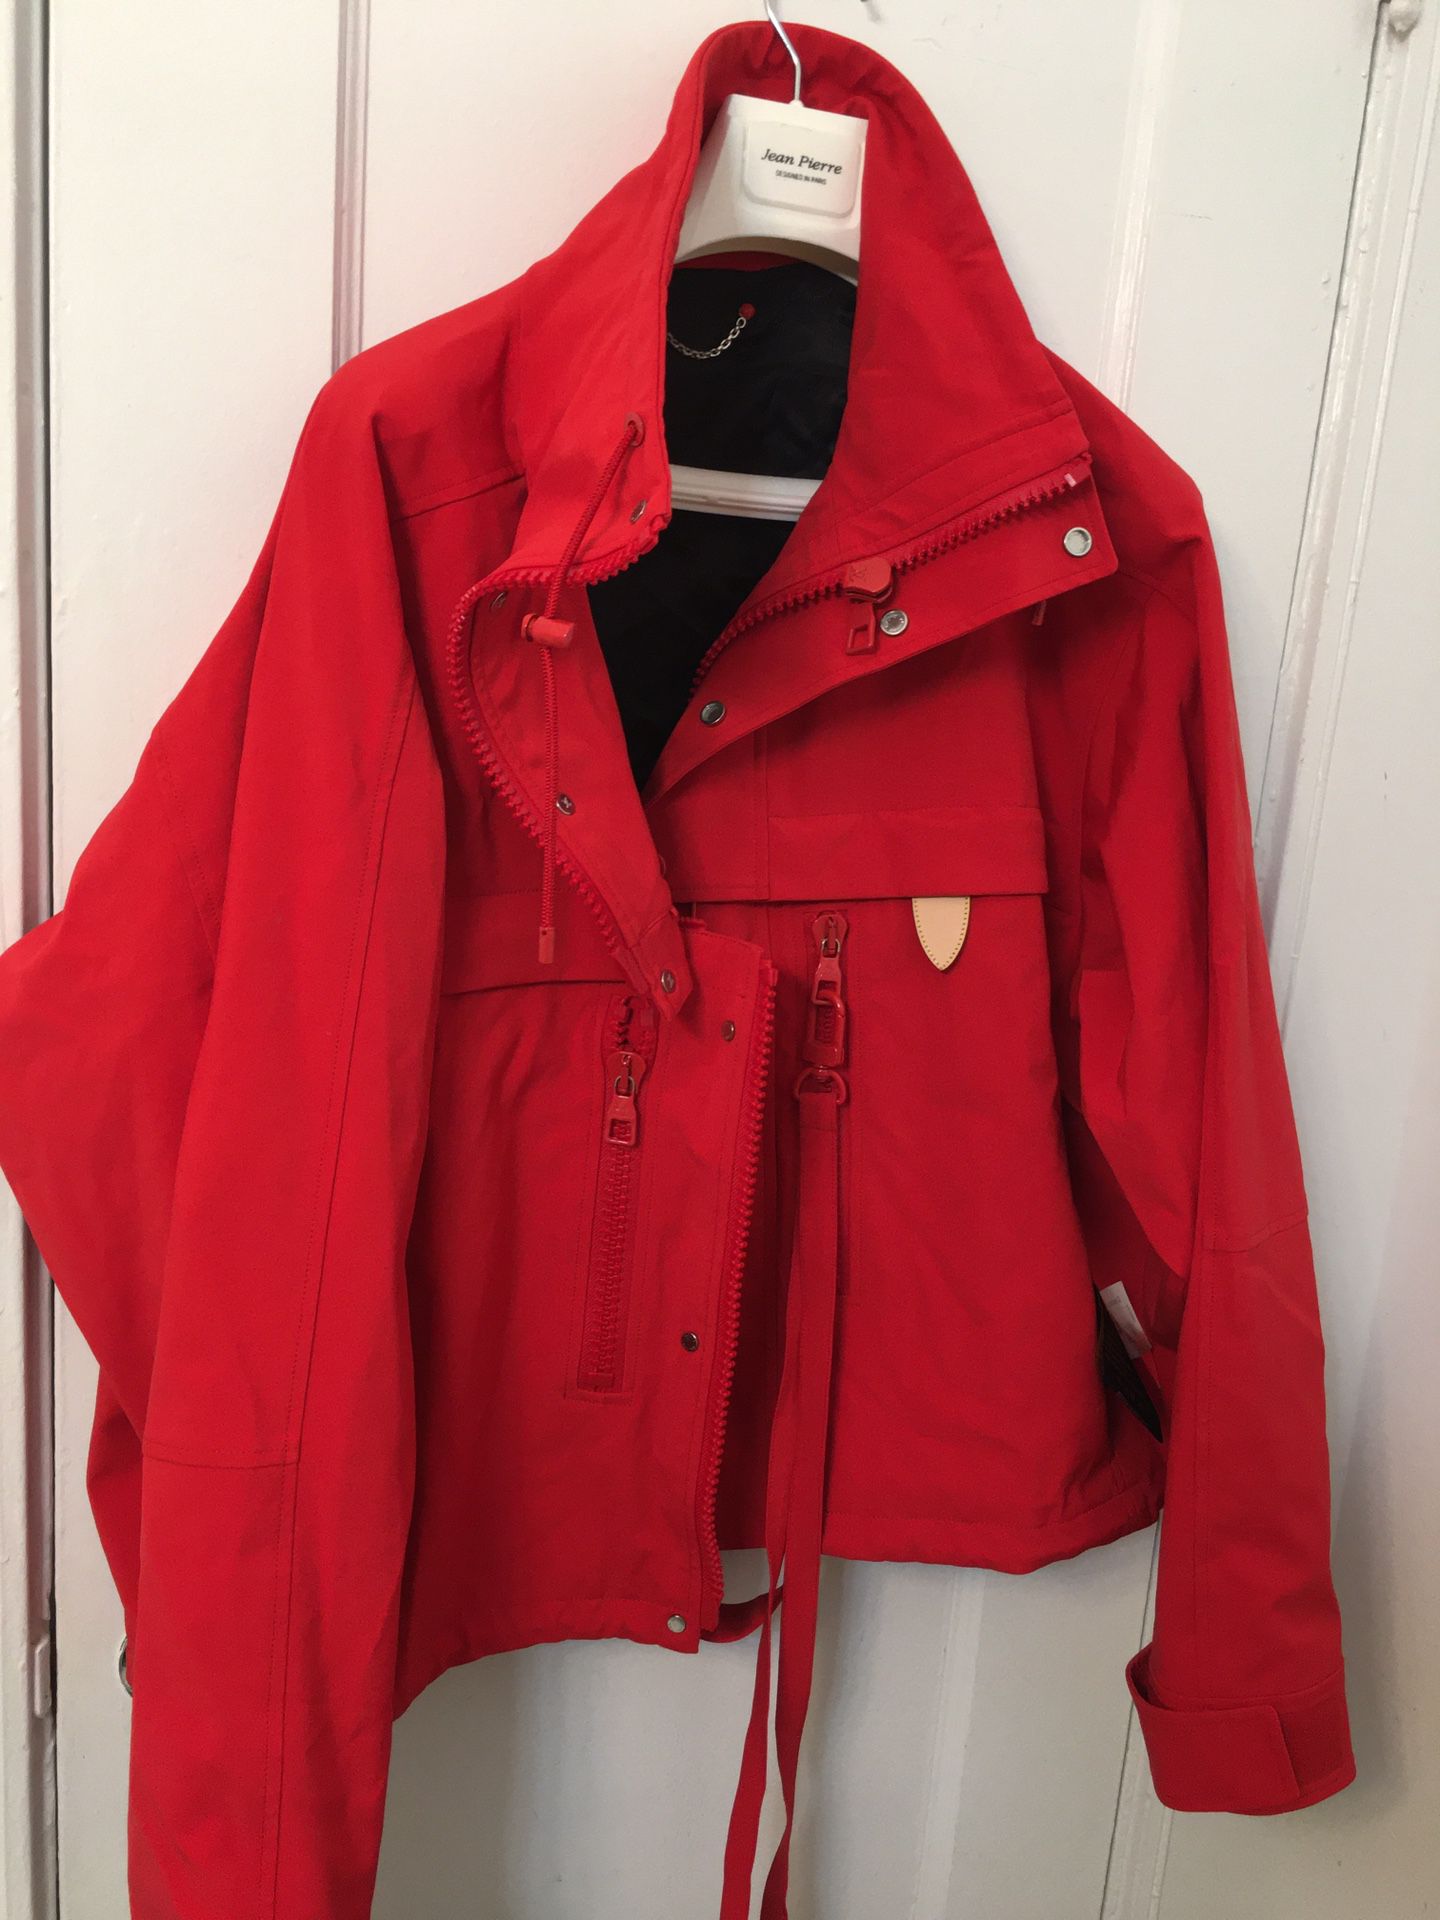 Louis Vuitton, Jackets & Coats, Louis Vuitton Ca 36929 Red Plain Rainbow  Jacketbrand New Without Tag And Box